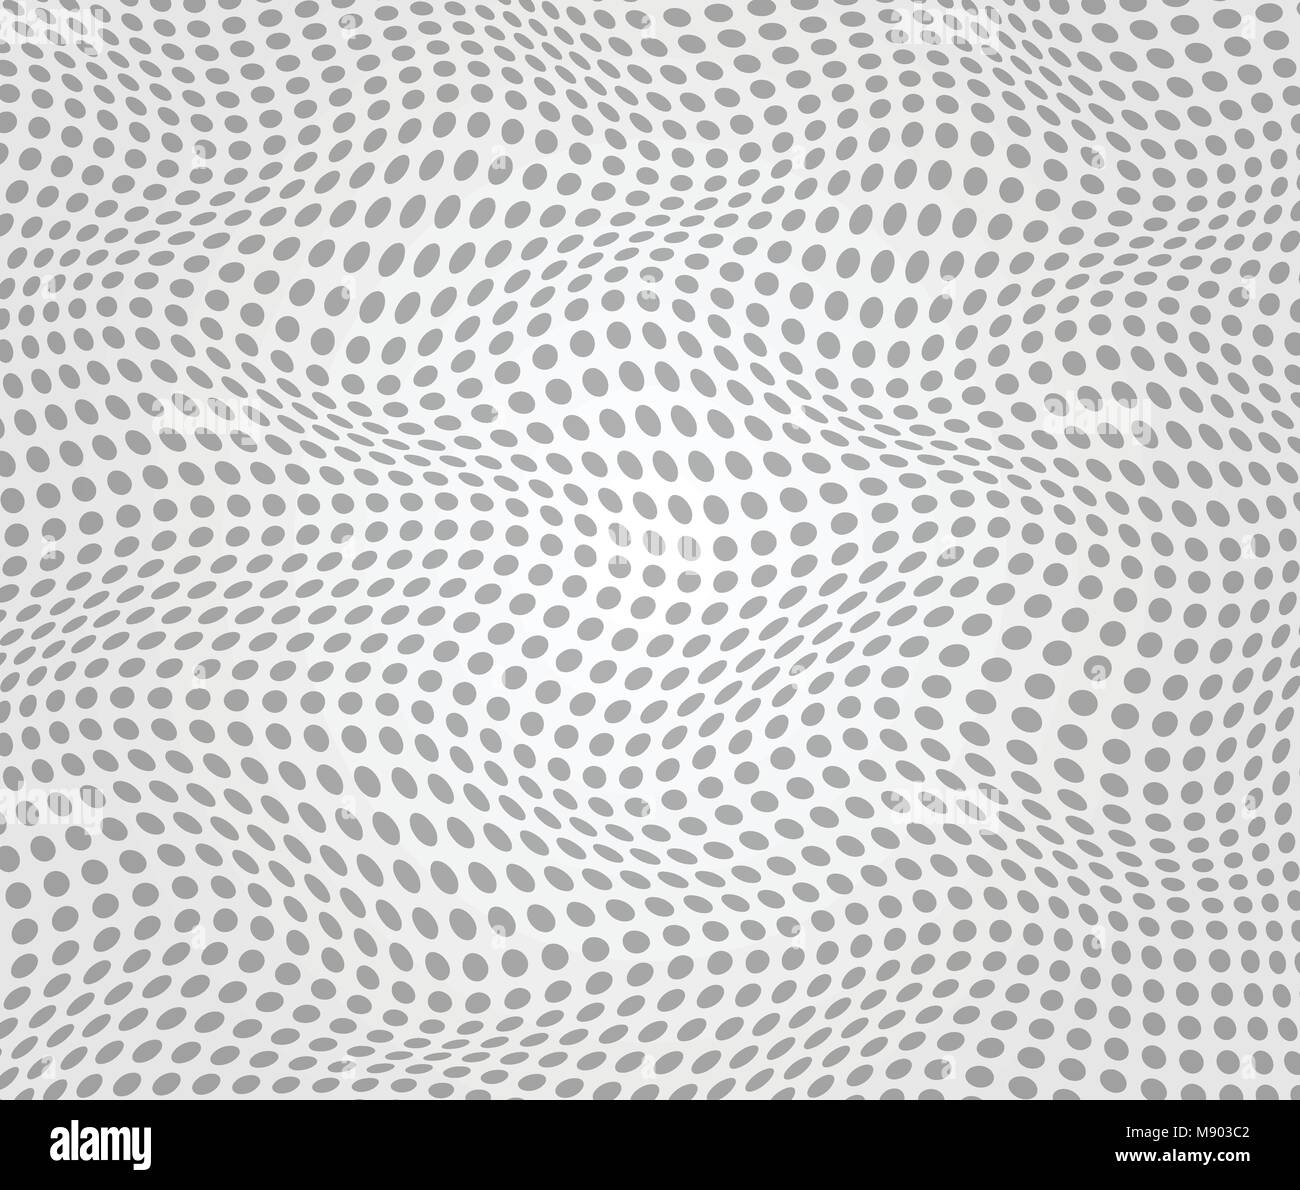 Pattern of soft dark round dot in halftone waves on cream background, illustration vector eps10 Stock Vector